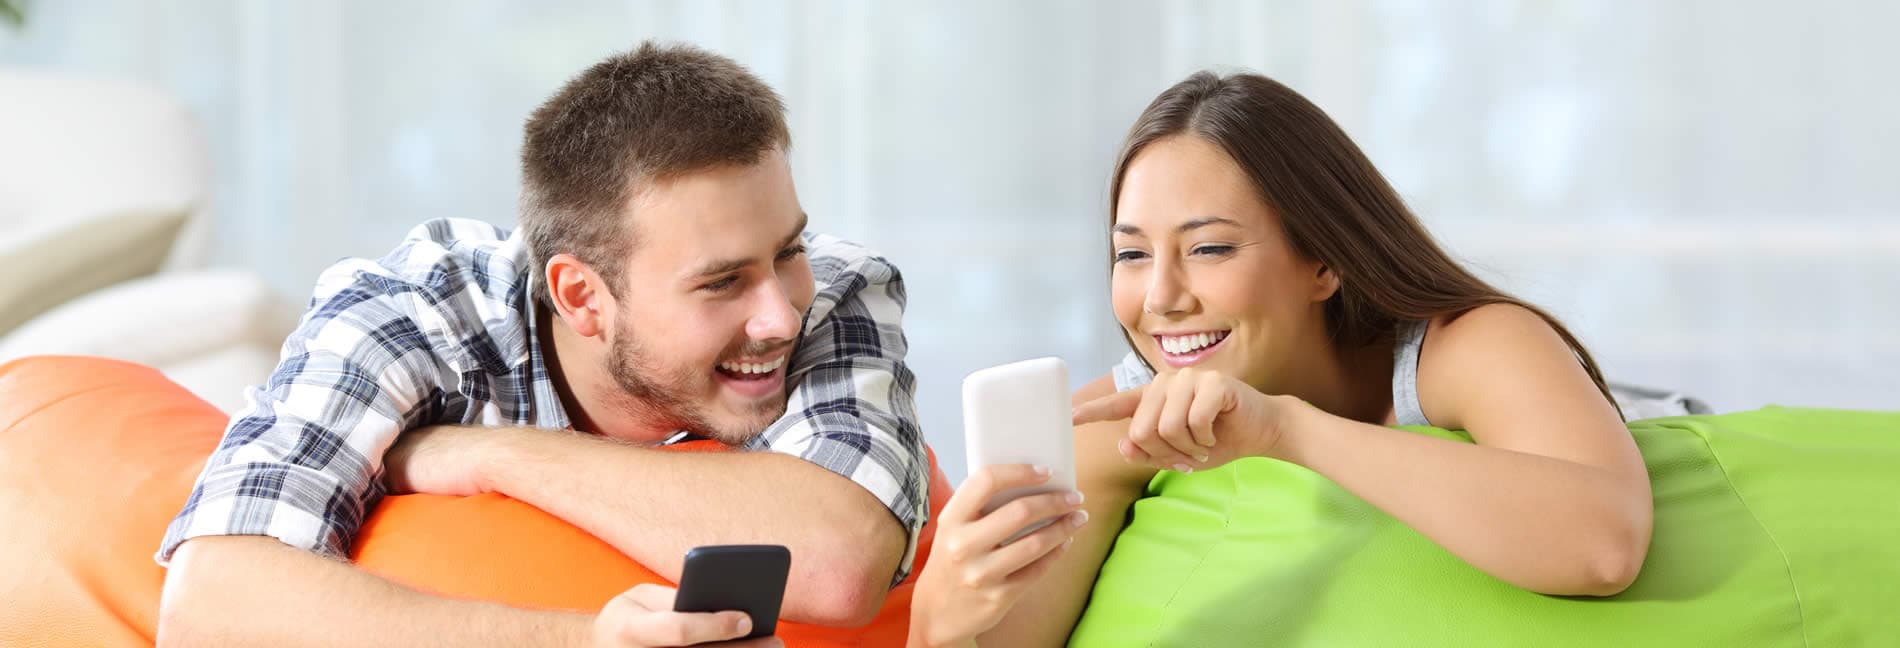 Smiling young woman points out something on her smartphone screen to young man who is also holding a smartphone